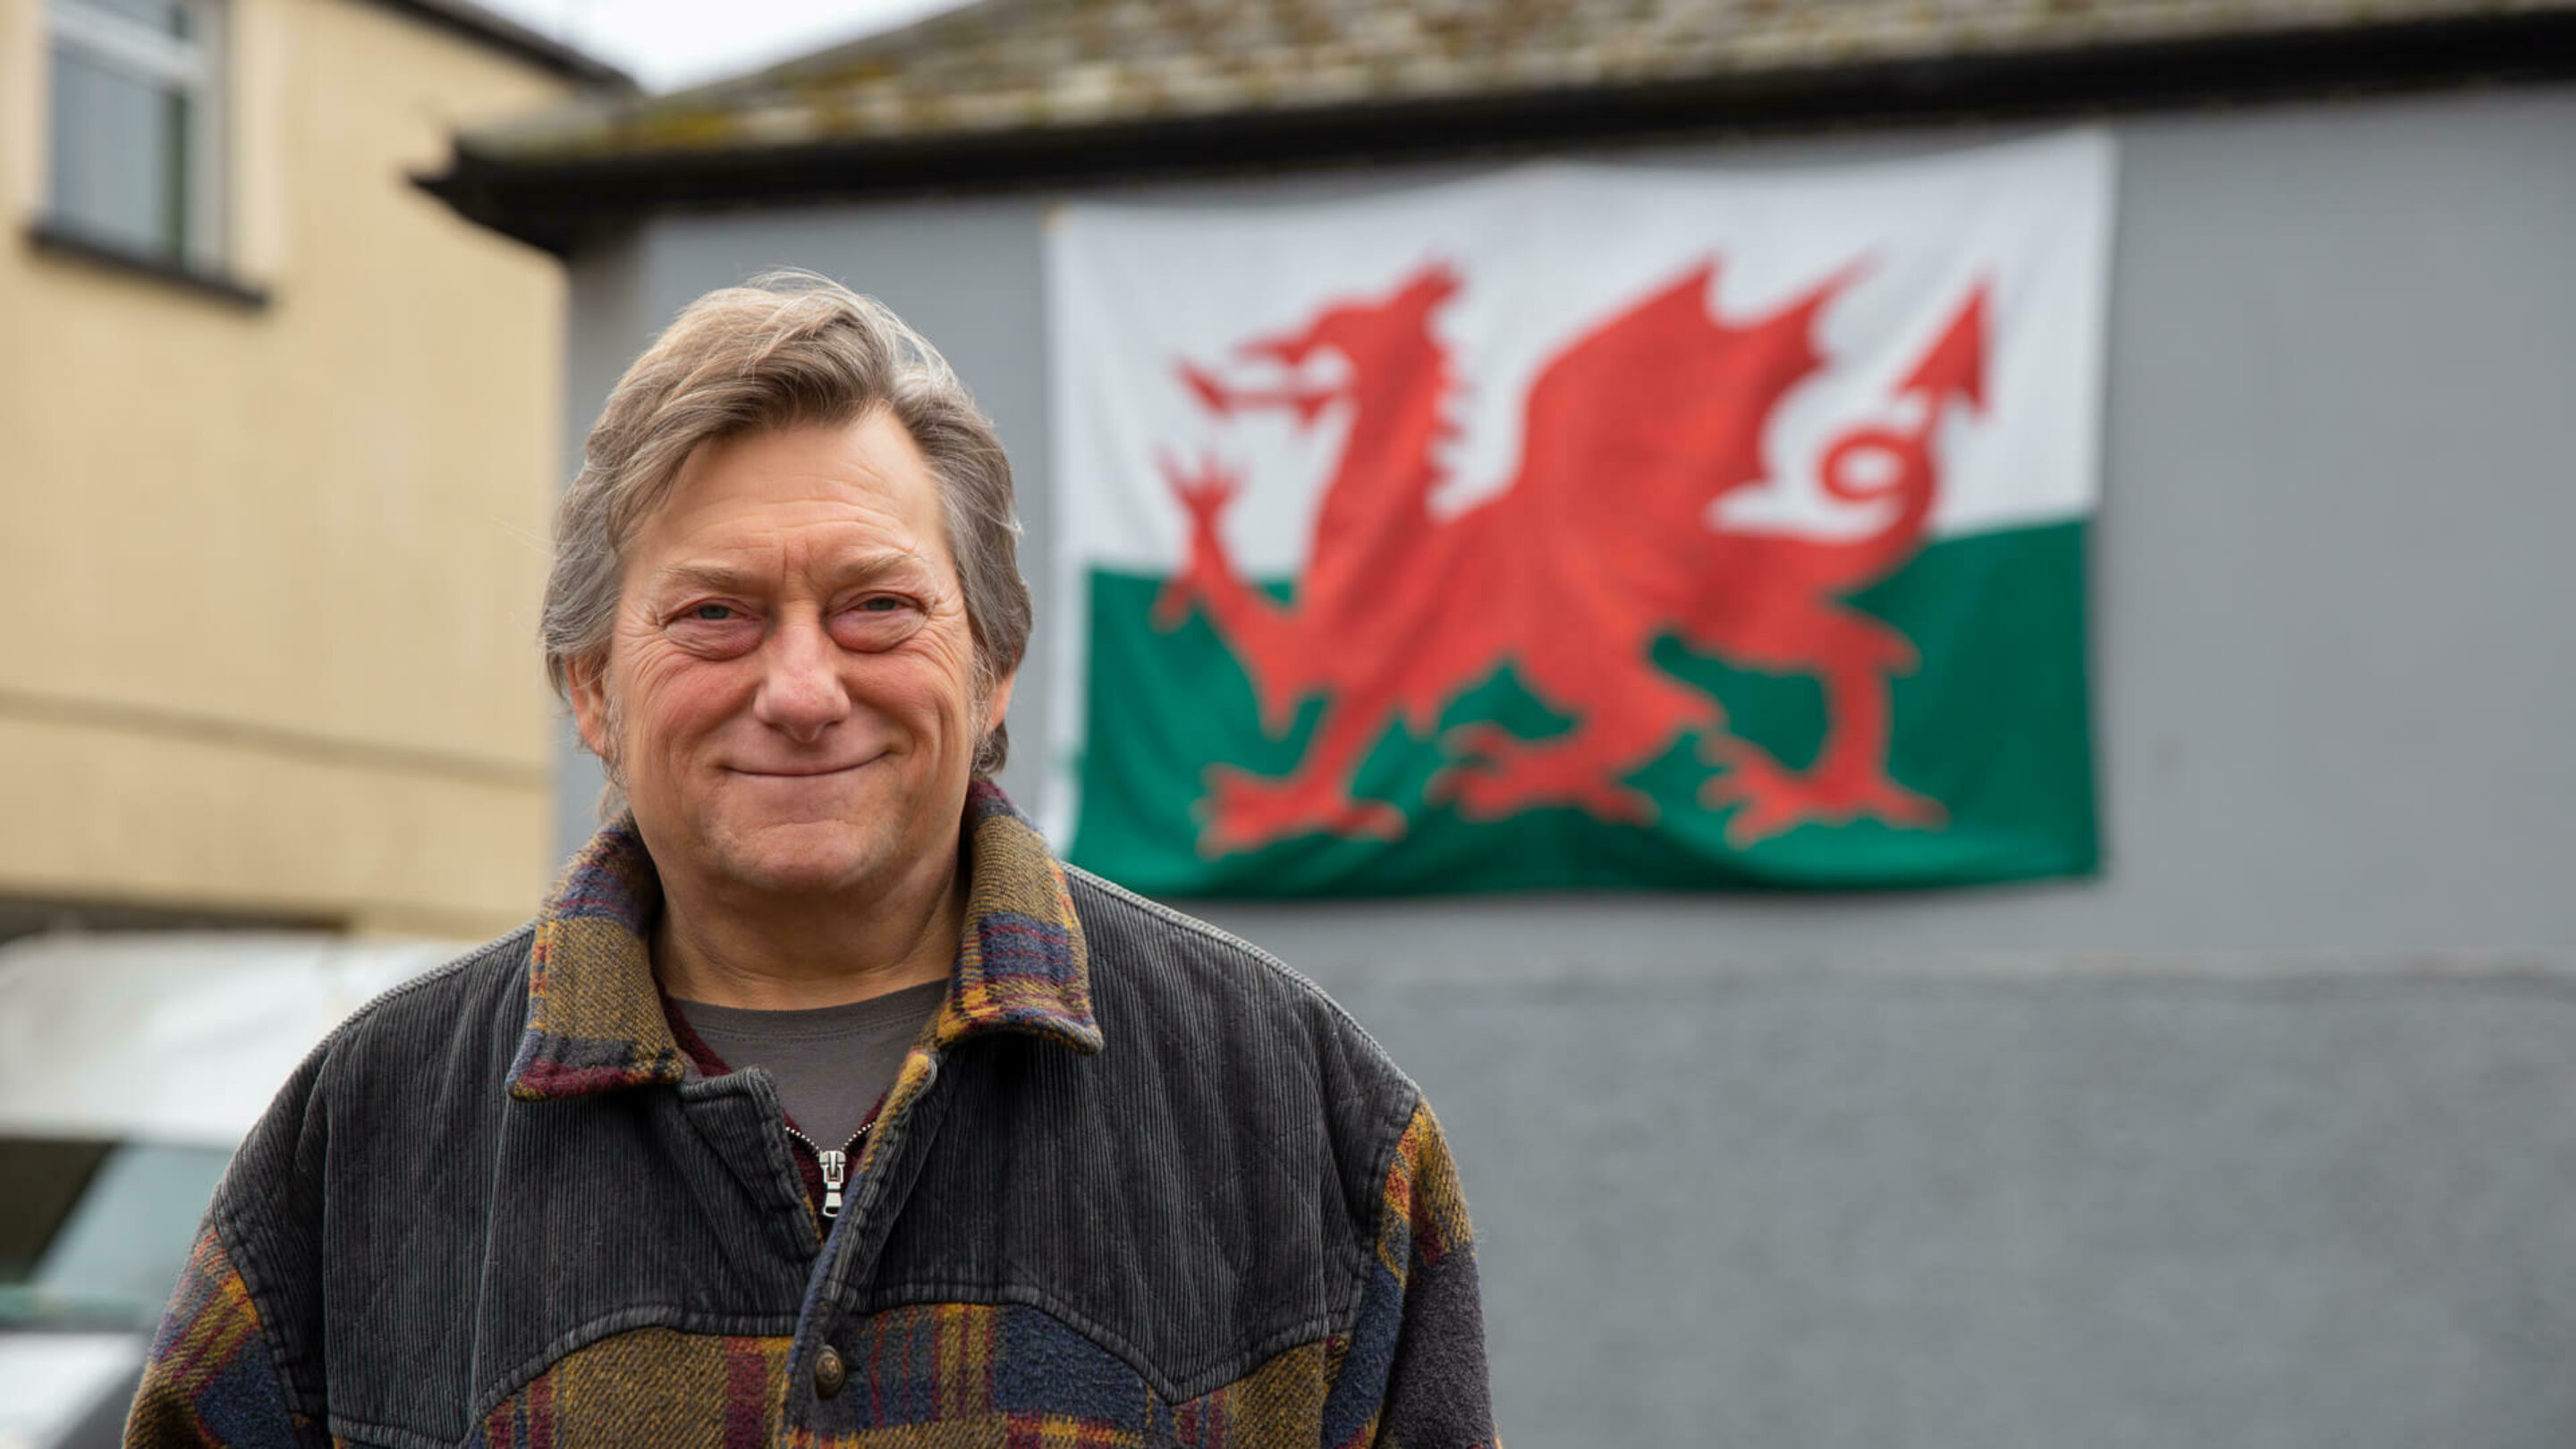 Older male smiling towards the camera with a Welsh flag hung behind him on the side of a building.